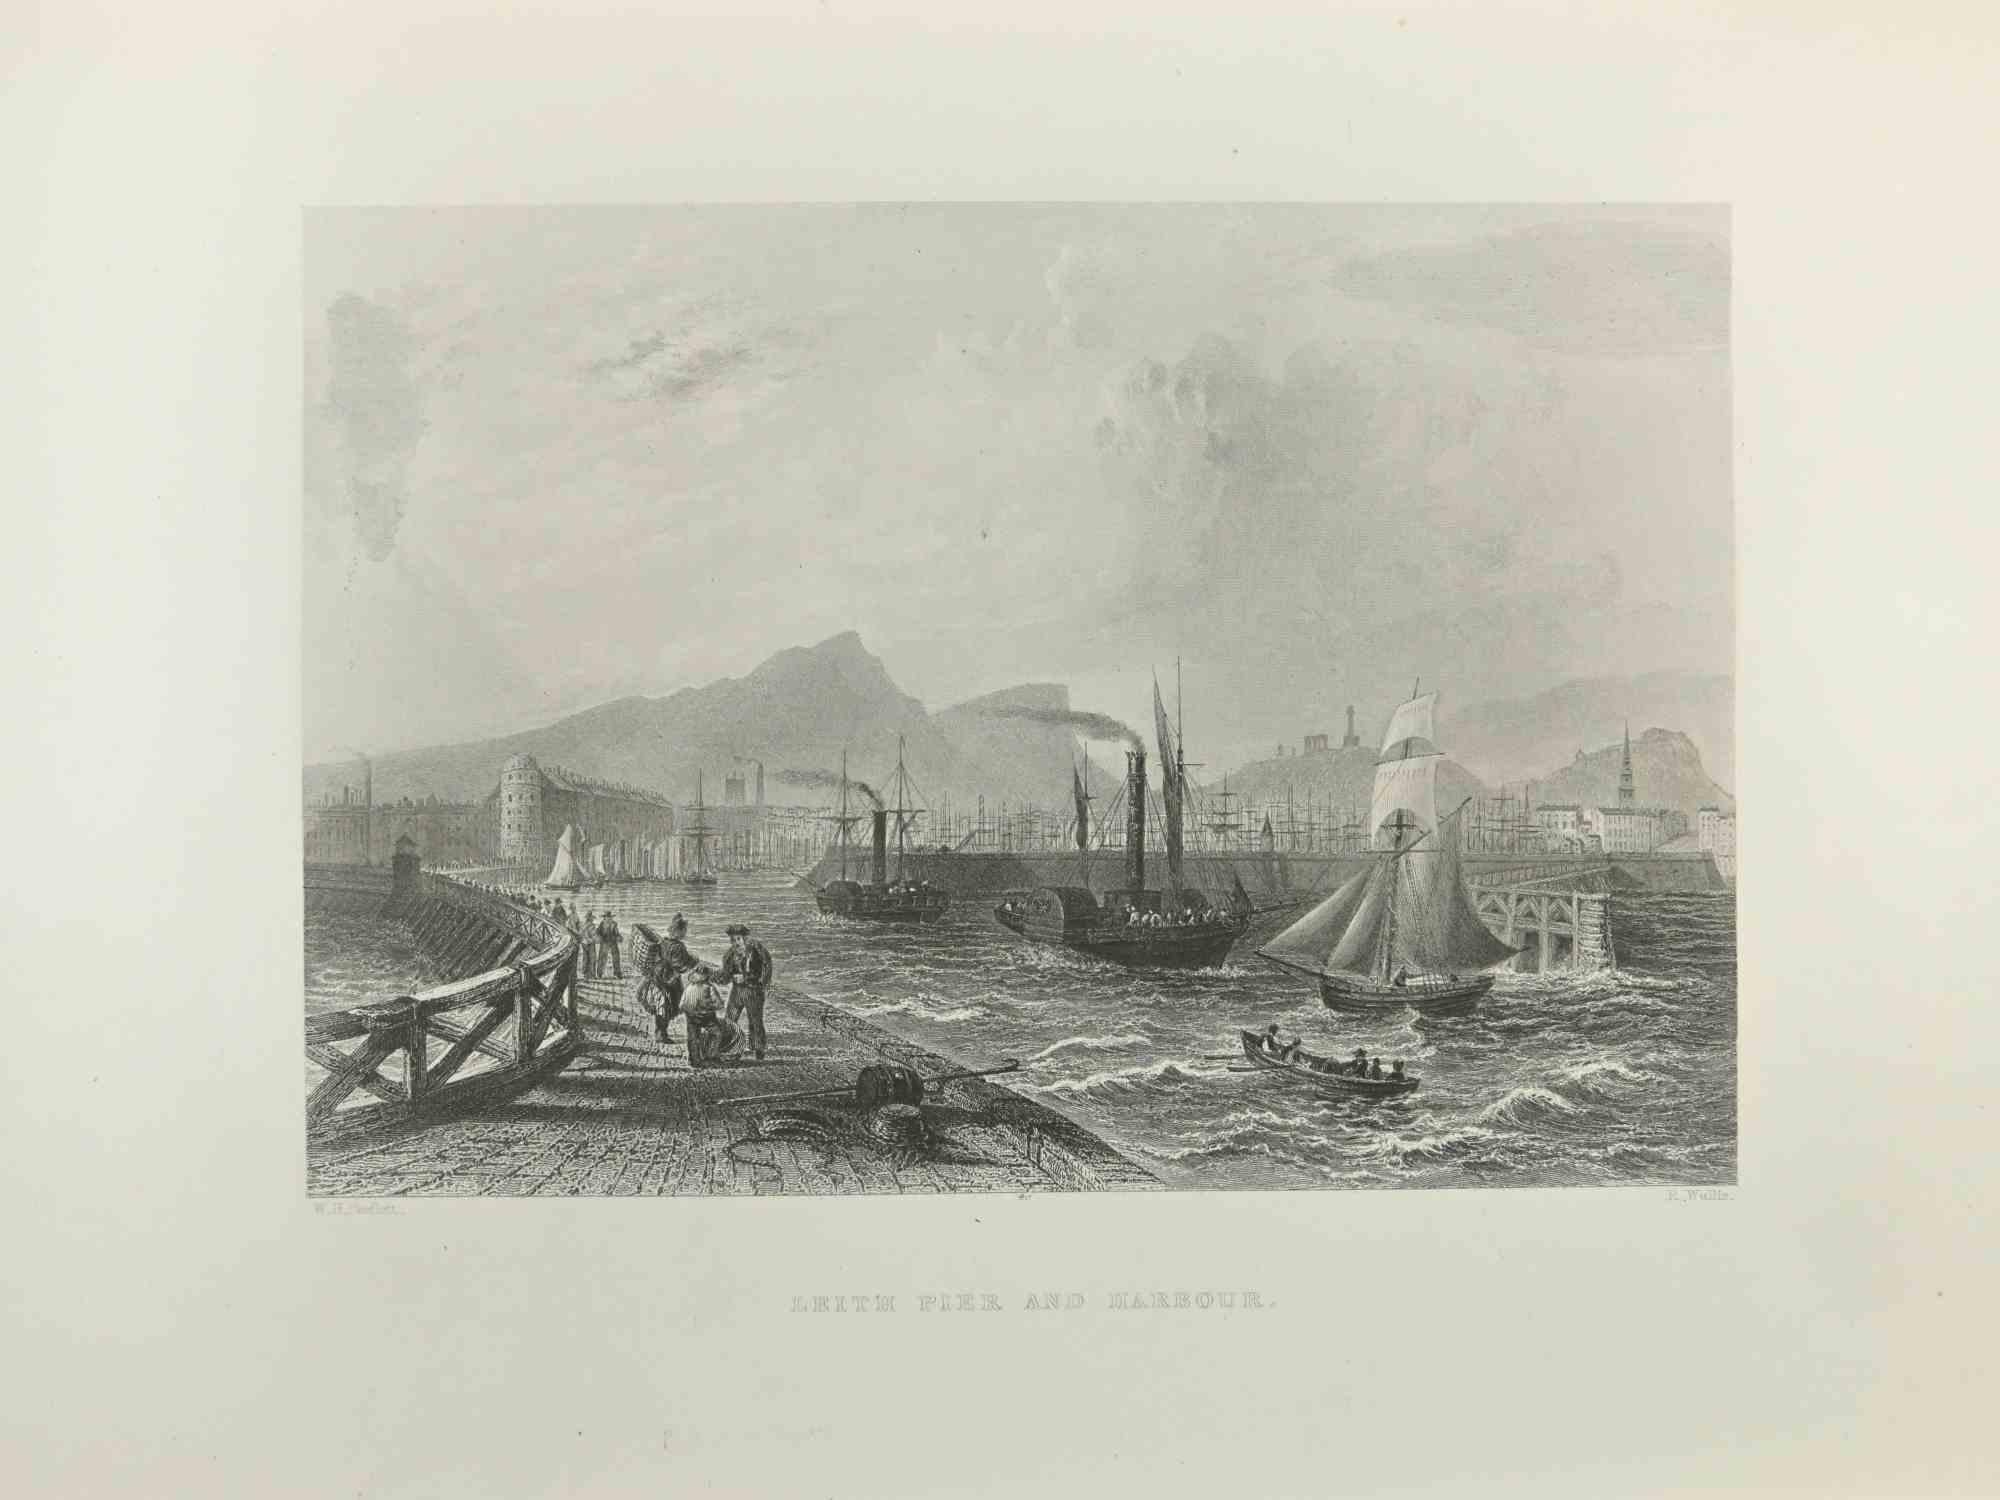 William Henry Bartlett  Figurative Print - Leith Pier and Harbour - Etching By W.H. Bartlett - 1845